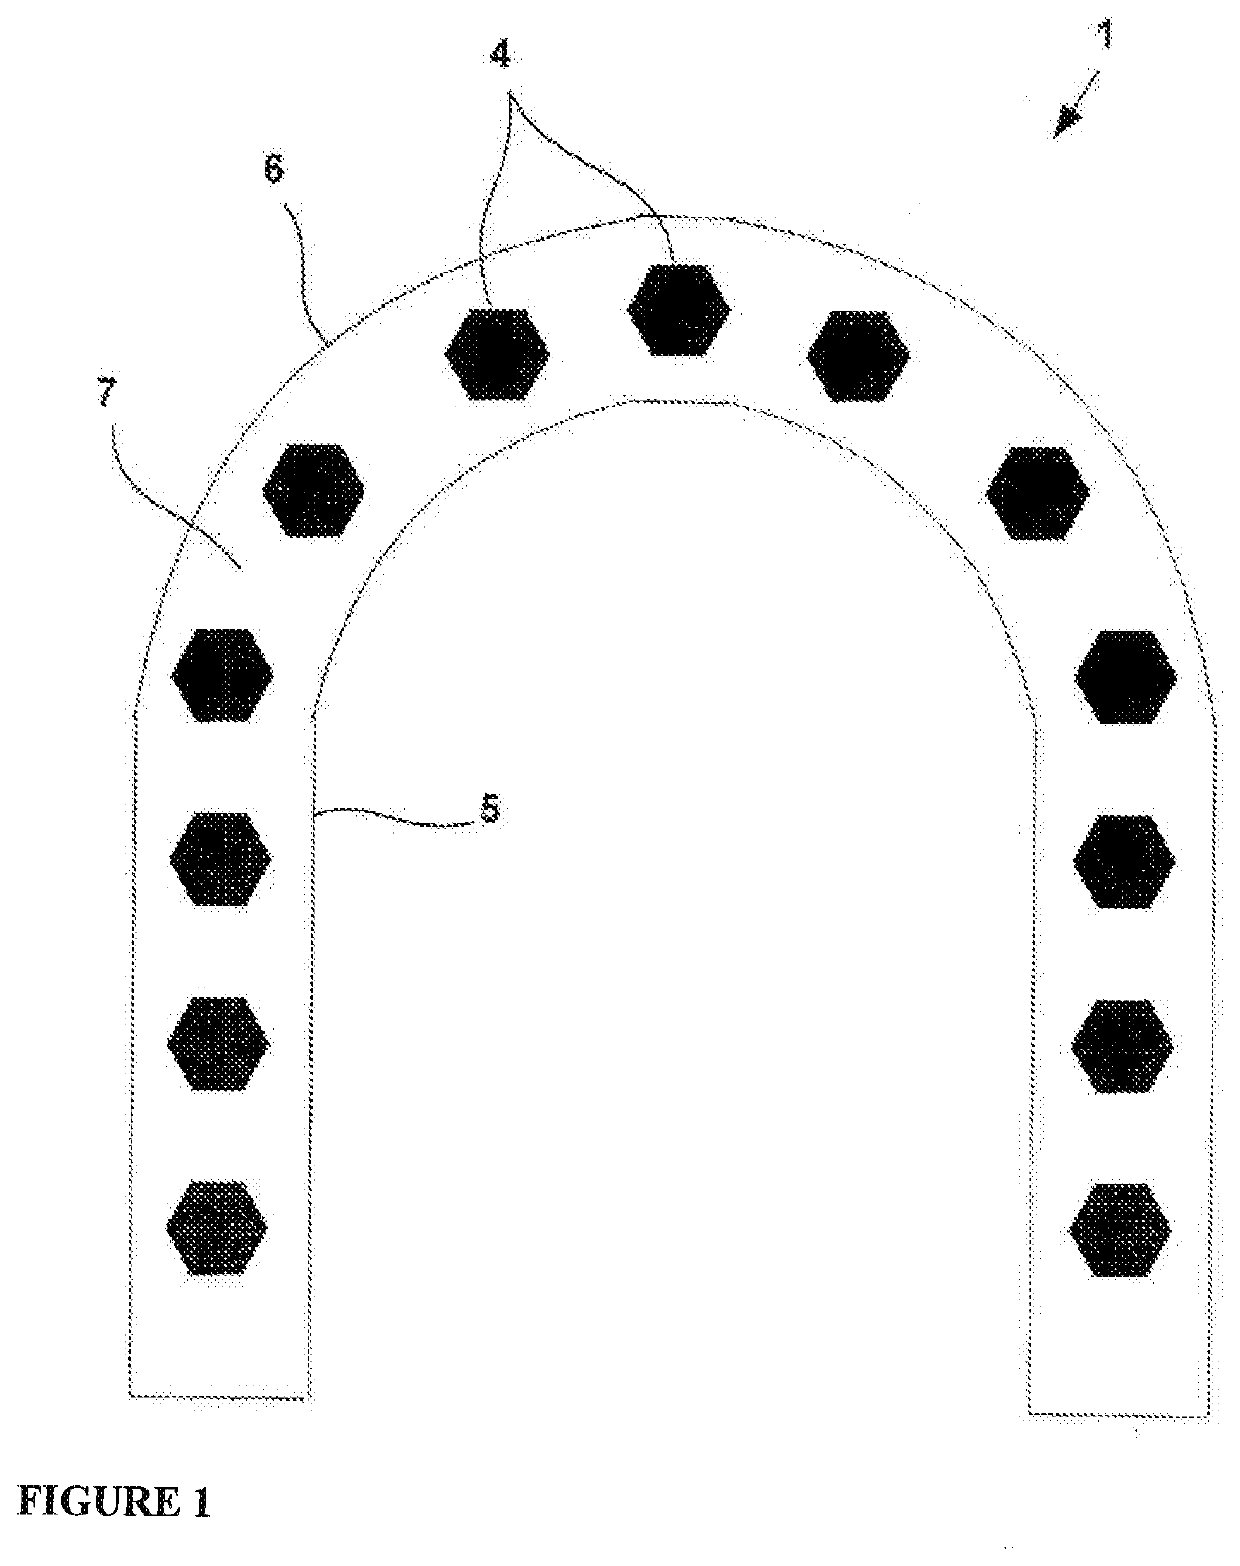 Hard Capsule Shell Compositions for the Oral Contraceptive Formulations